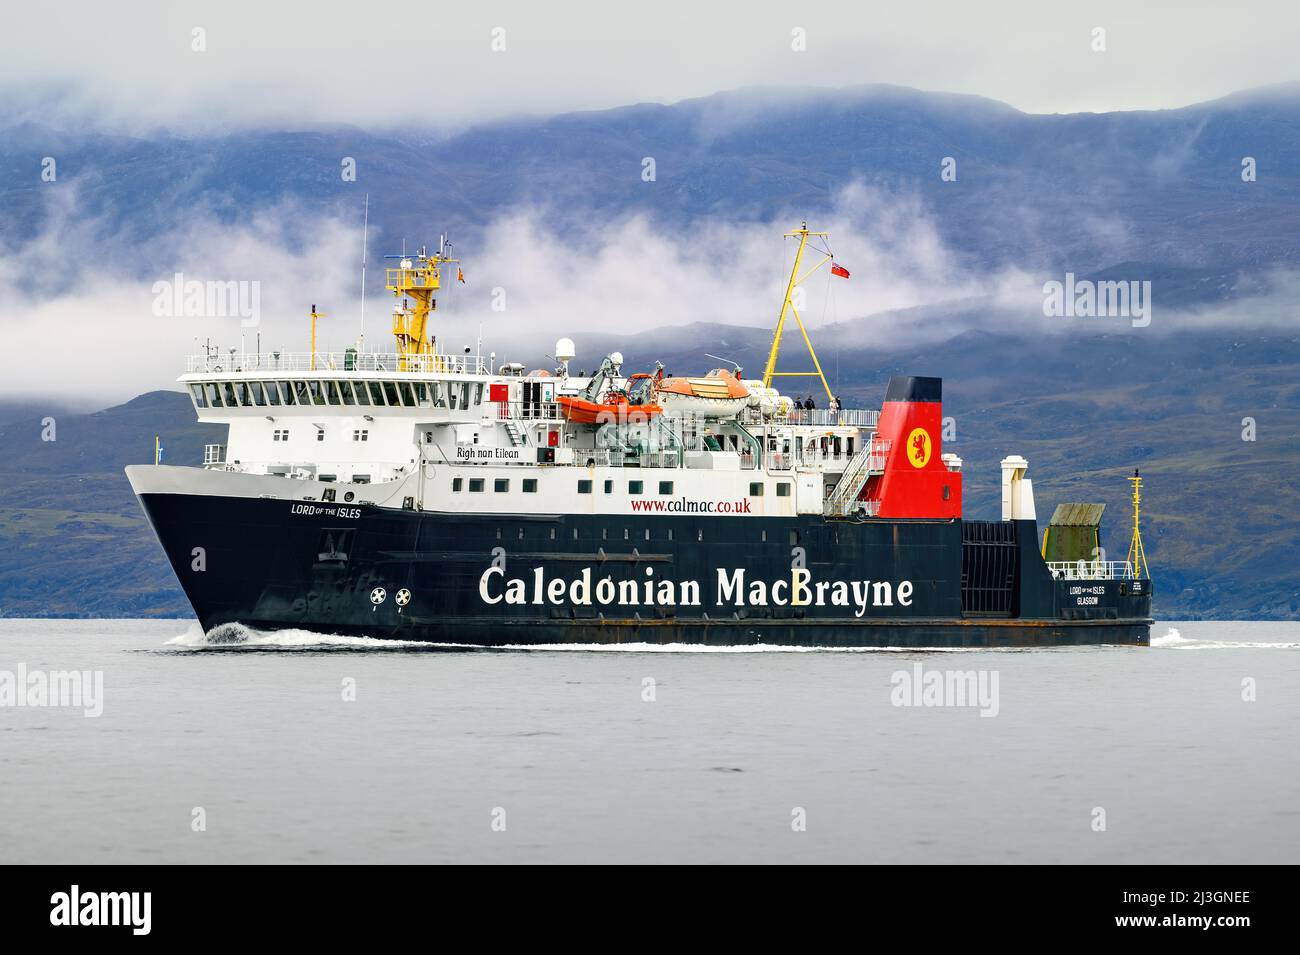 Lord of the Isles is a ferry operated by Caledonian MacBrayne on inter-island and mainland routes in Scotland - October 2021. Stock Photo